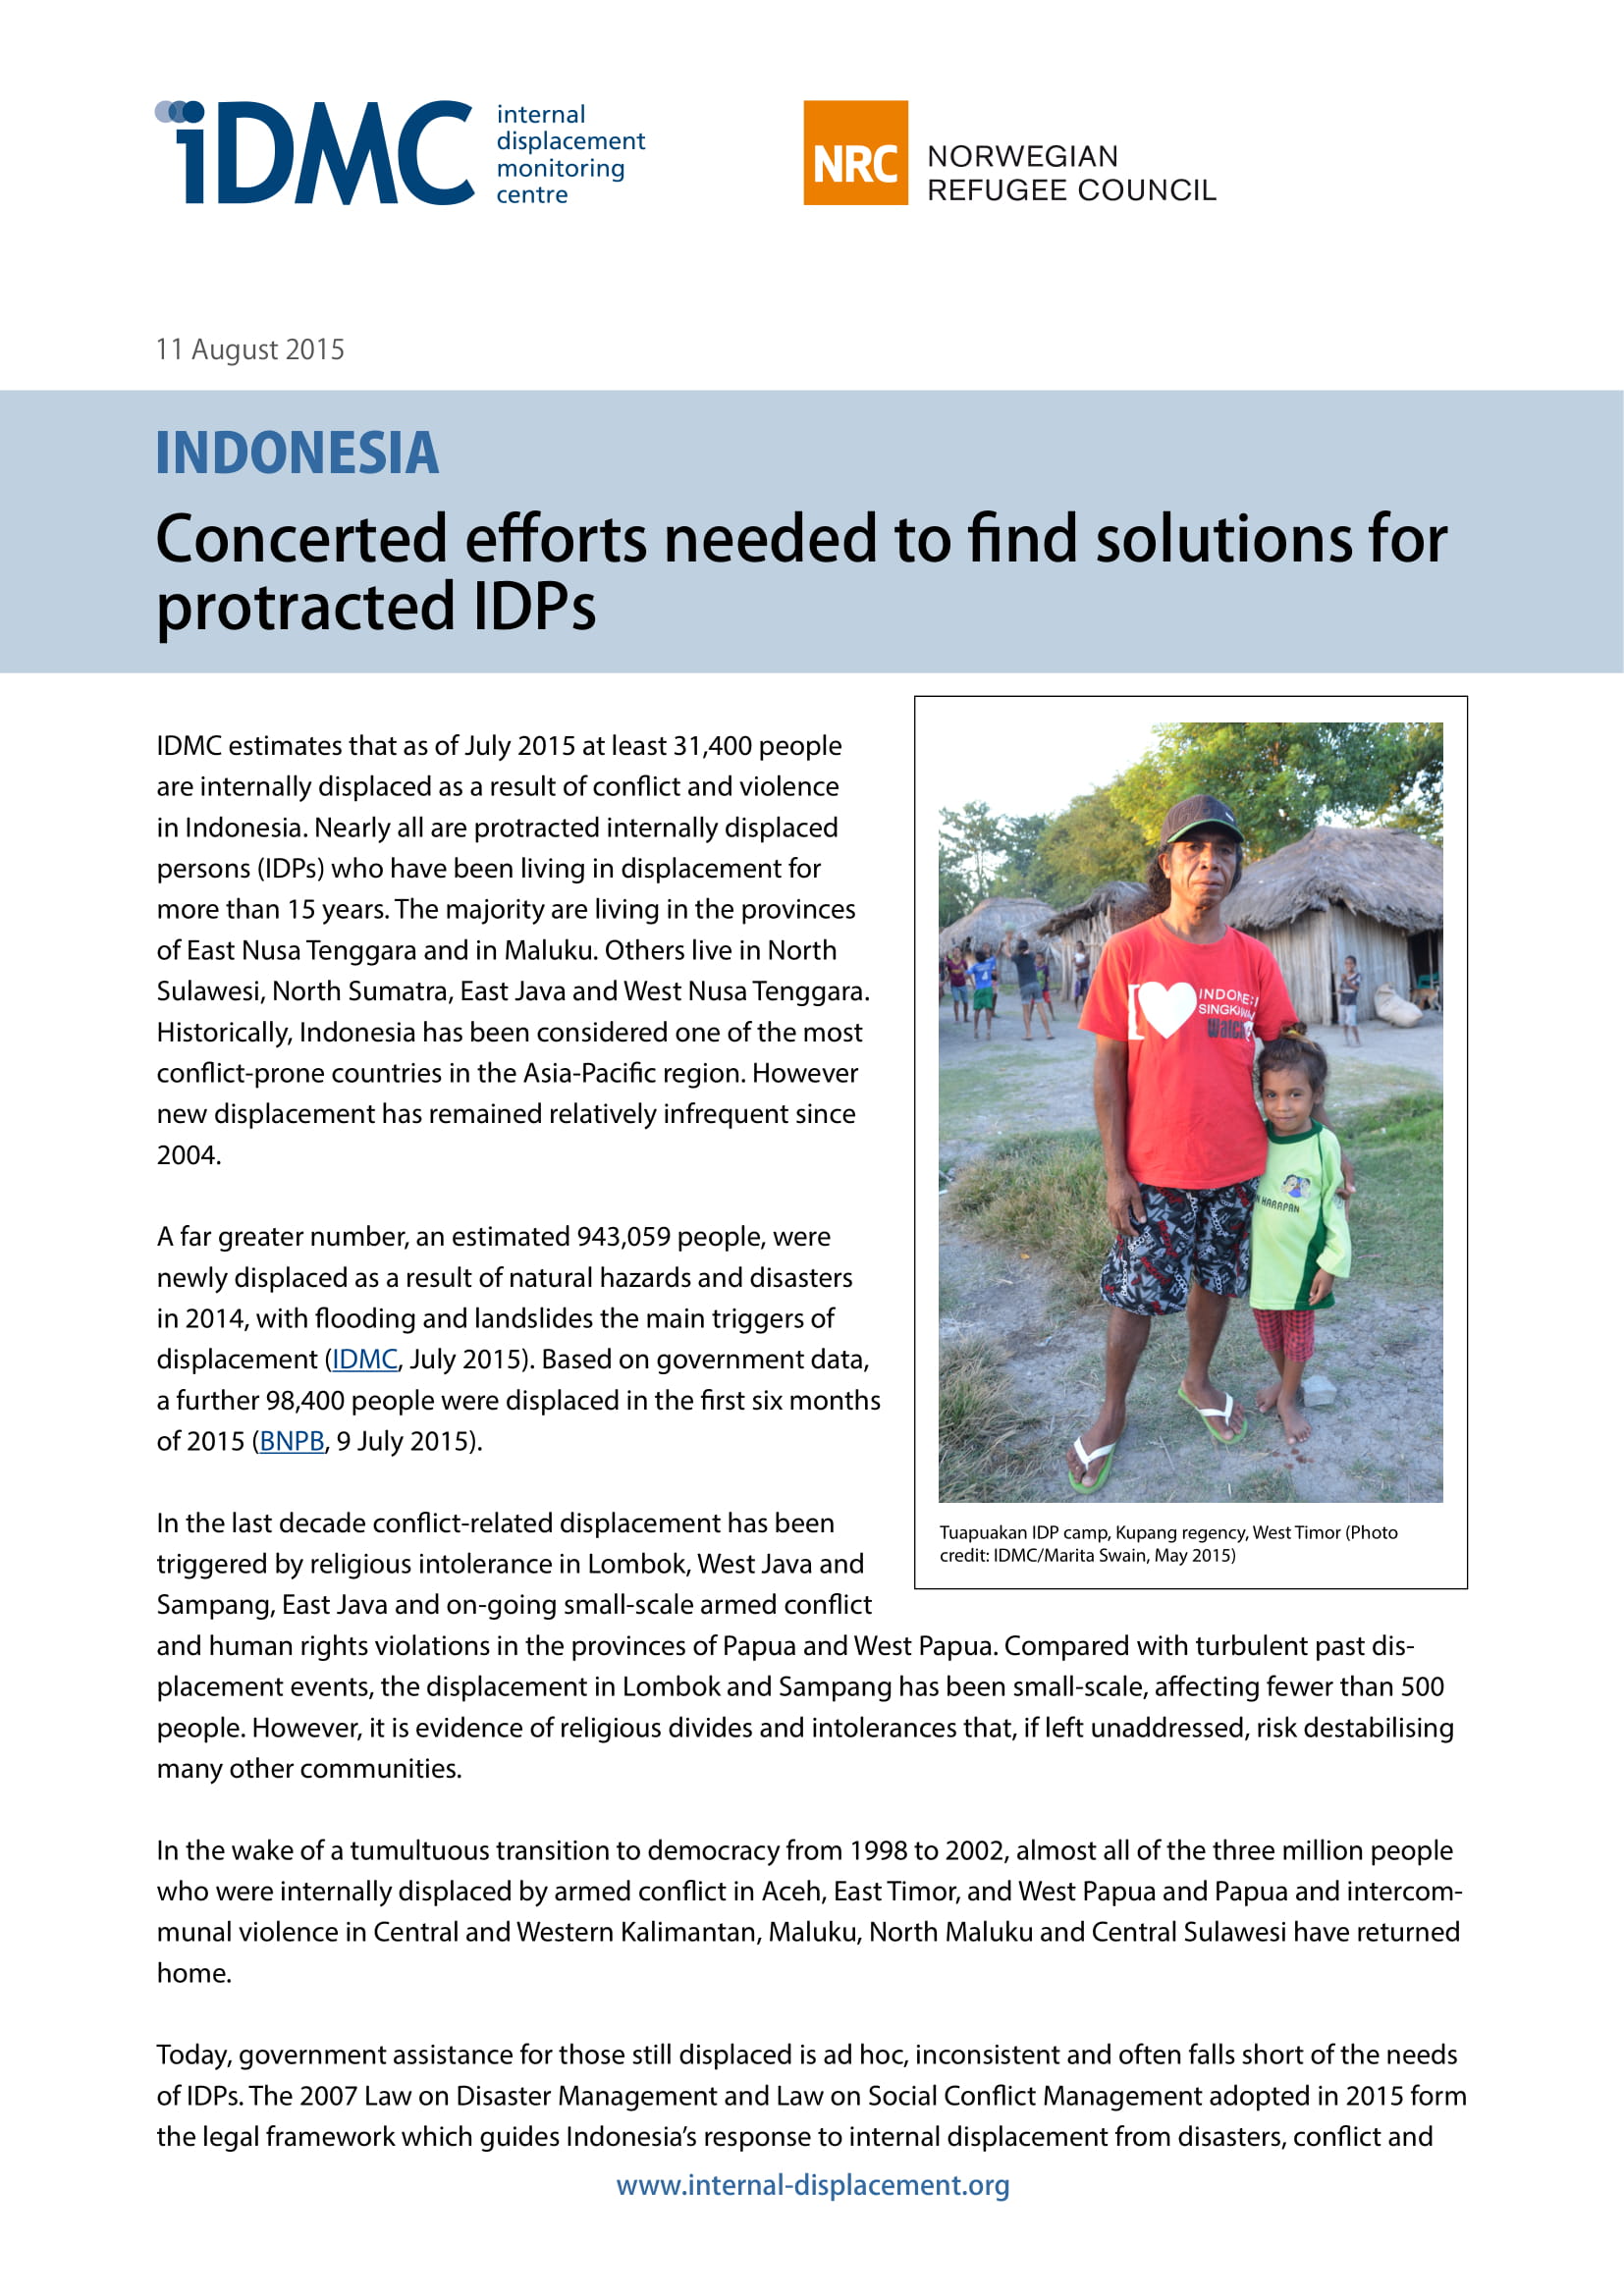 Indonesia: Concerted efforts needed to find solutions for protracted IDP